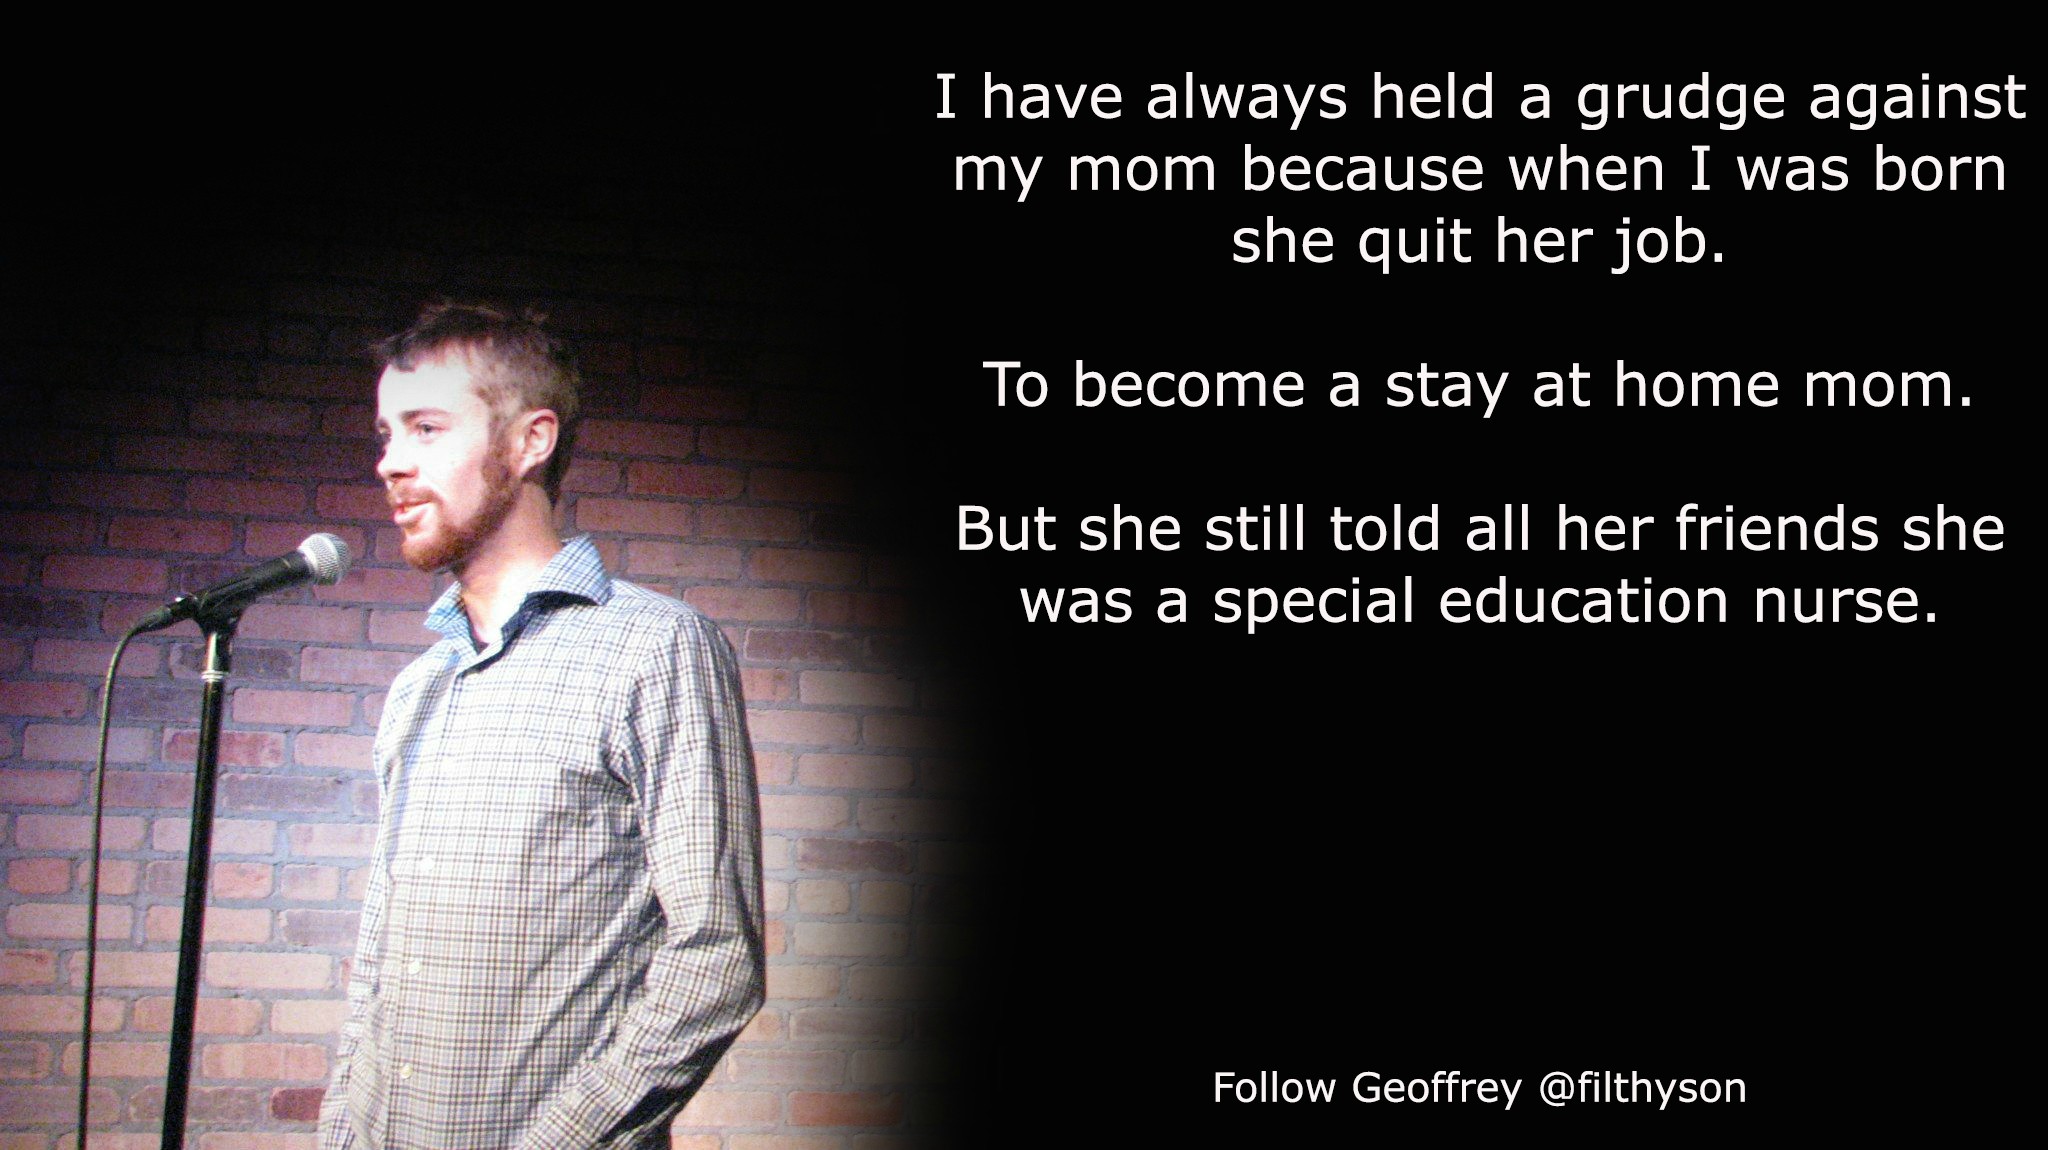 More Than This - I have always held a grudge against my mom because when I was born she quit her job. To become a stay at home mom. U But she still told all her friends she was a special education nurse. Geoffrey